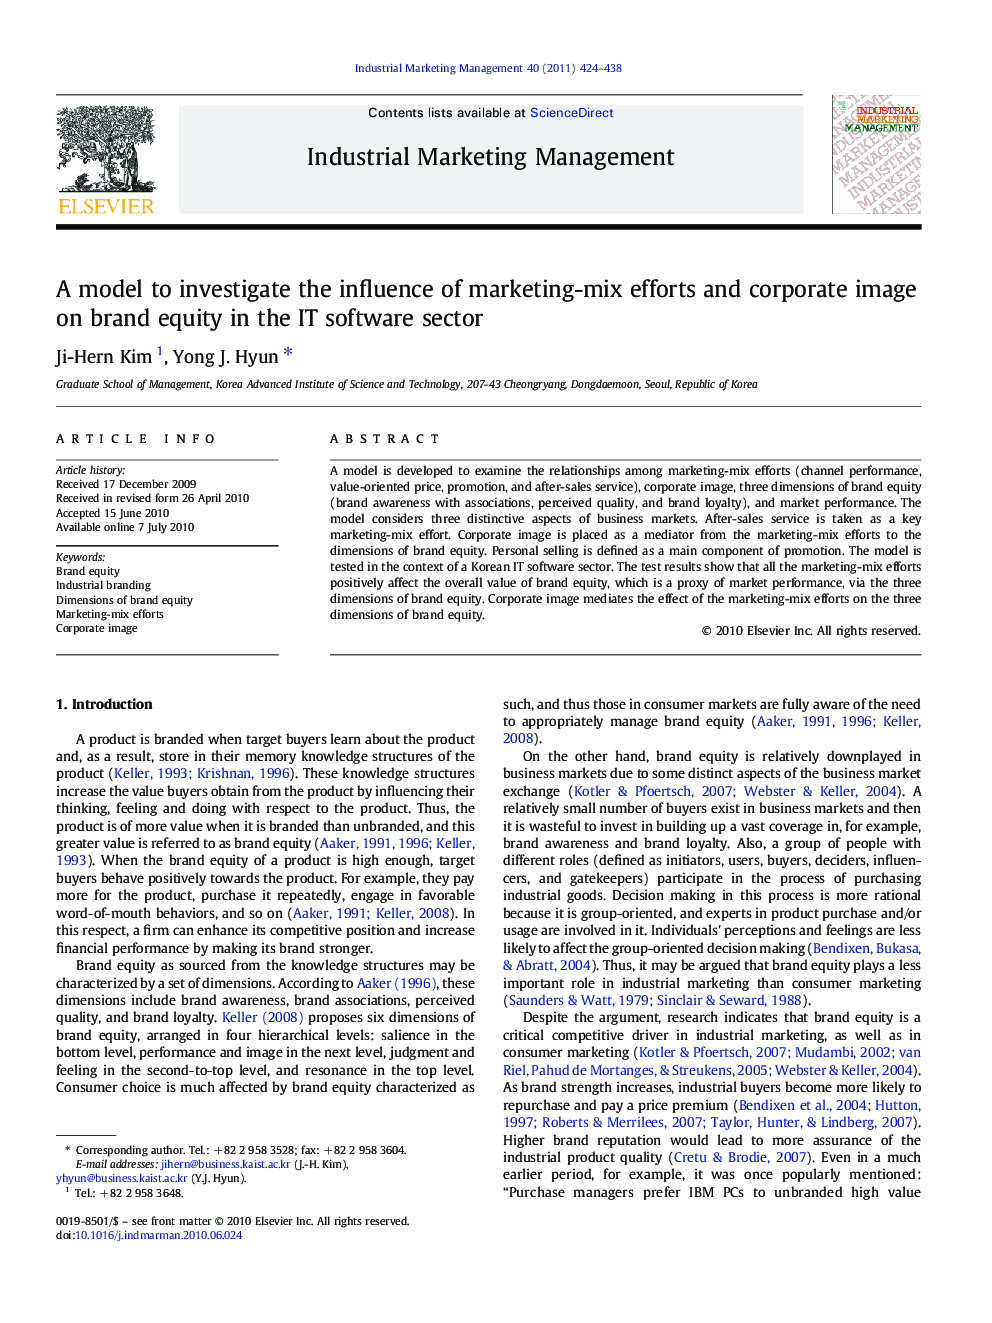 A model to investigate the influence of marketing-mix efforts and corporate image on brand equity in the IT software sector